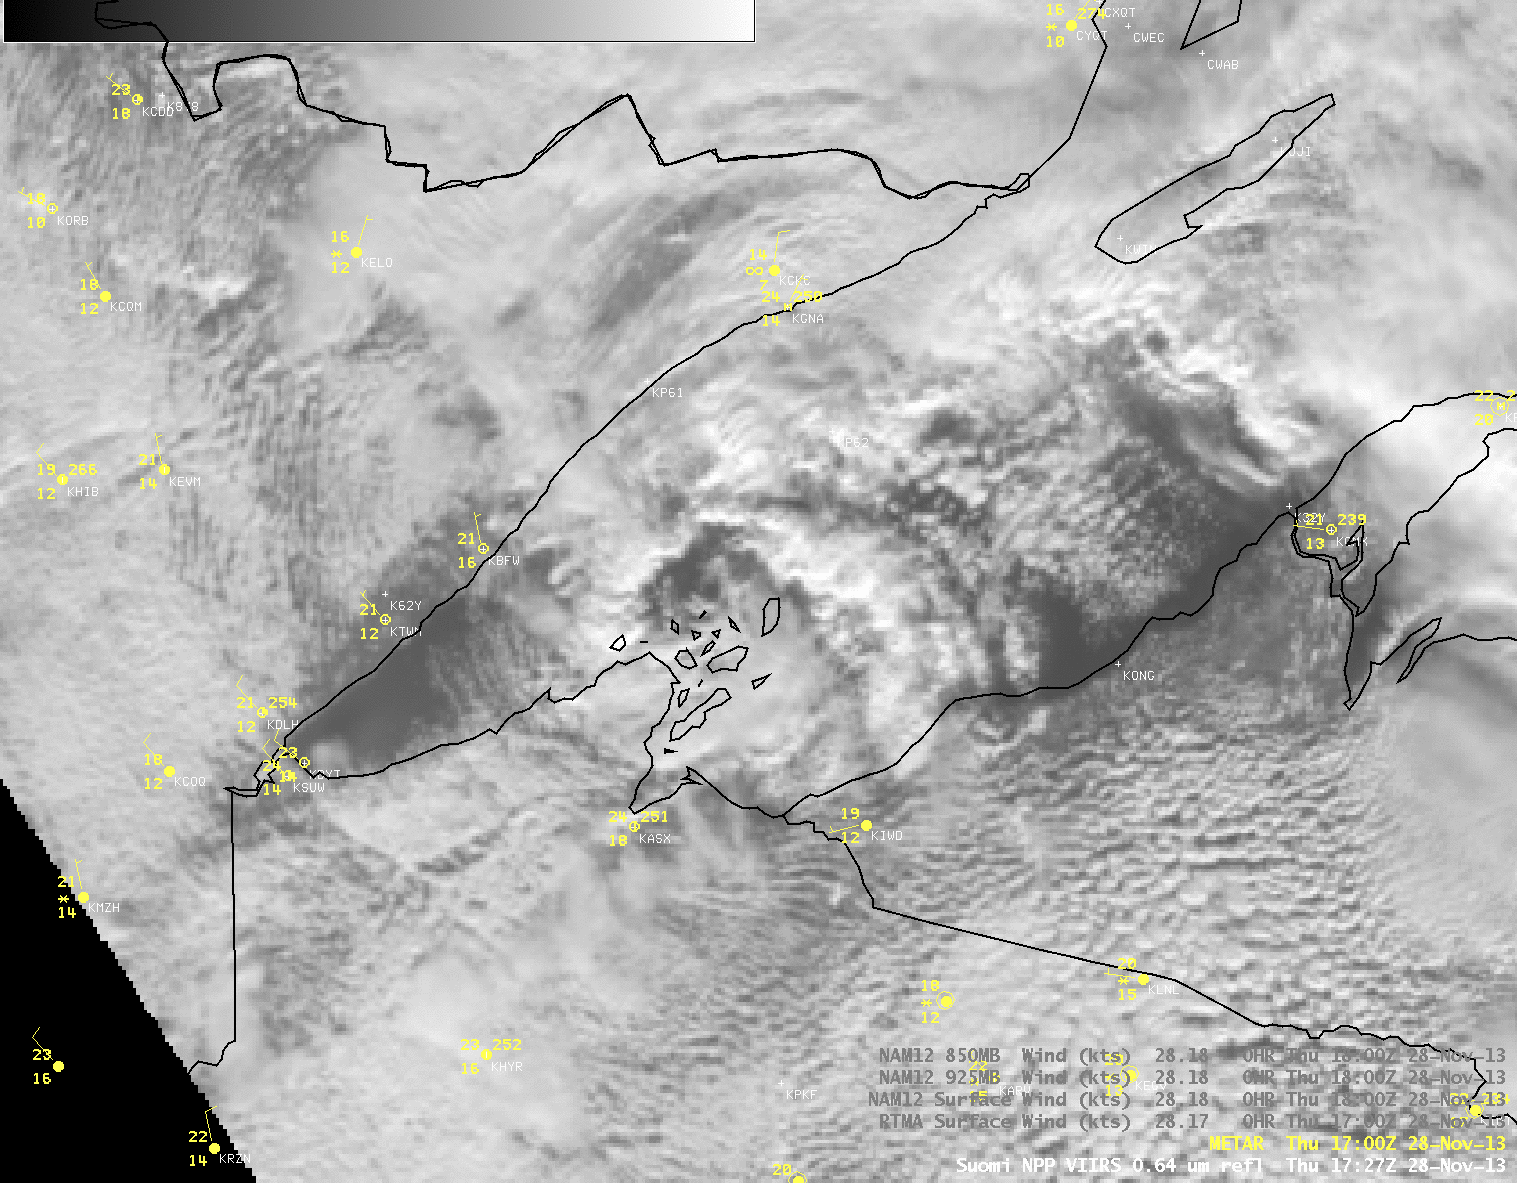 Suomi NPP VIIRS 0.64 Âµm visible image (with RTMA surface winds, NAM12 surface, 925, and 850 hPa winds)